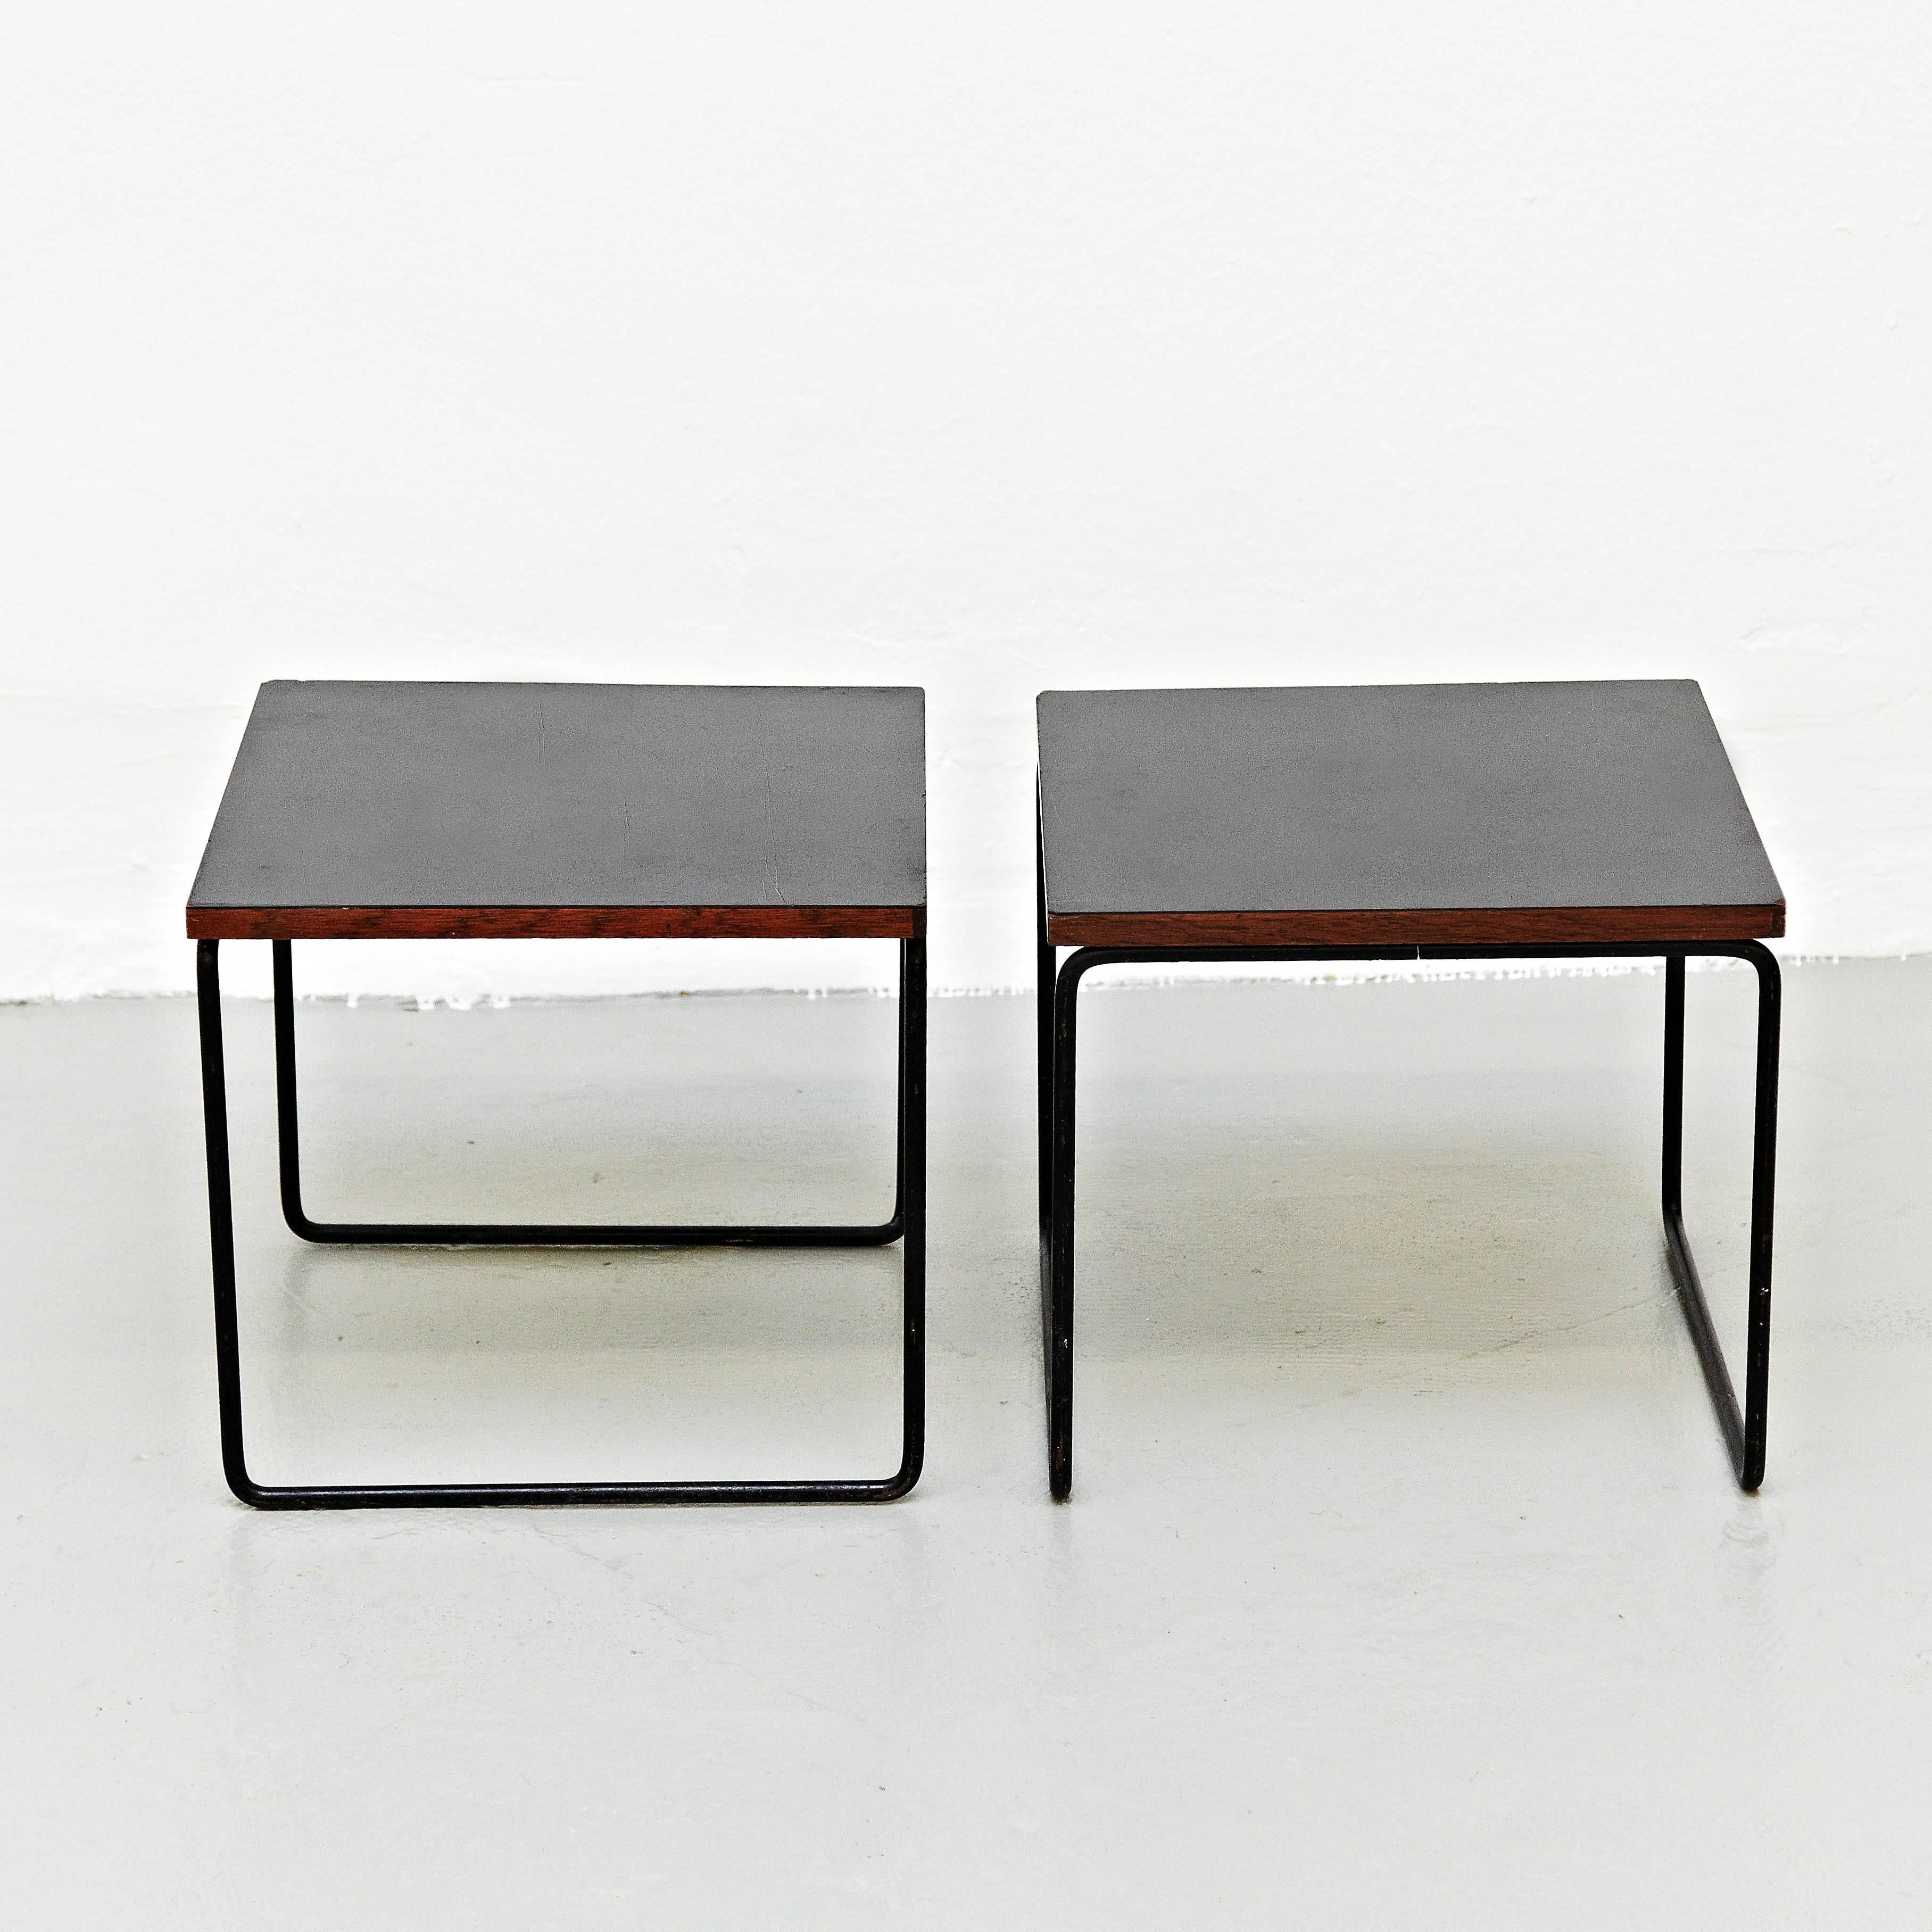 Tables designed by Pierre Guariche. Manufactured by Steiner, (France), circa 1950. Bent and painted iron frame, laminated wood. Signed with applied manufacturer's label to undeside: [Steiner] In good original condition, with minor wear consistent